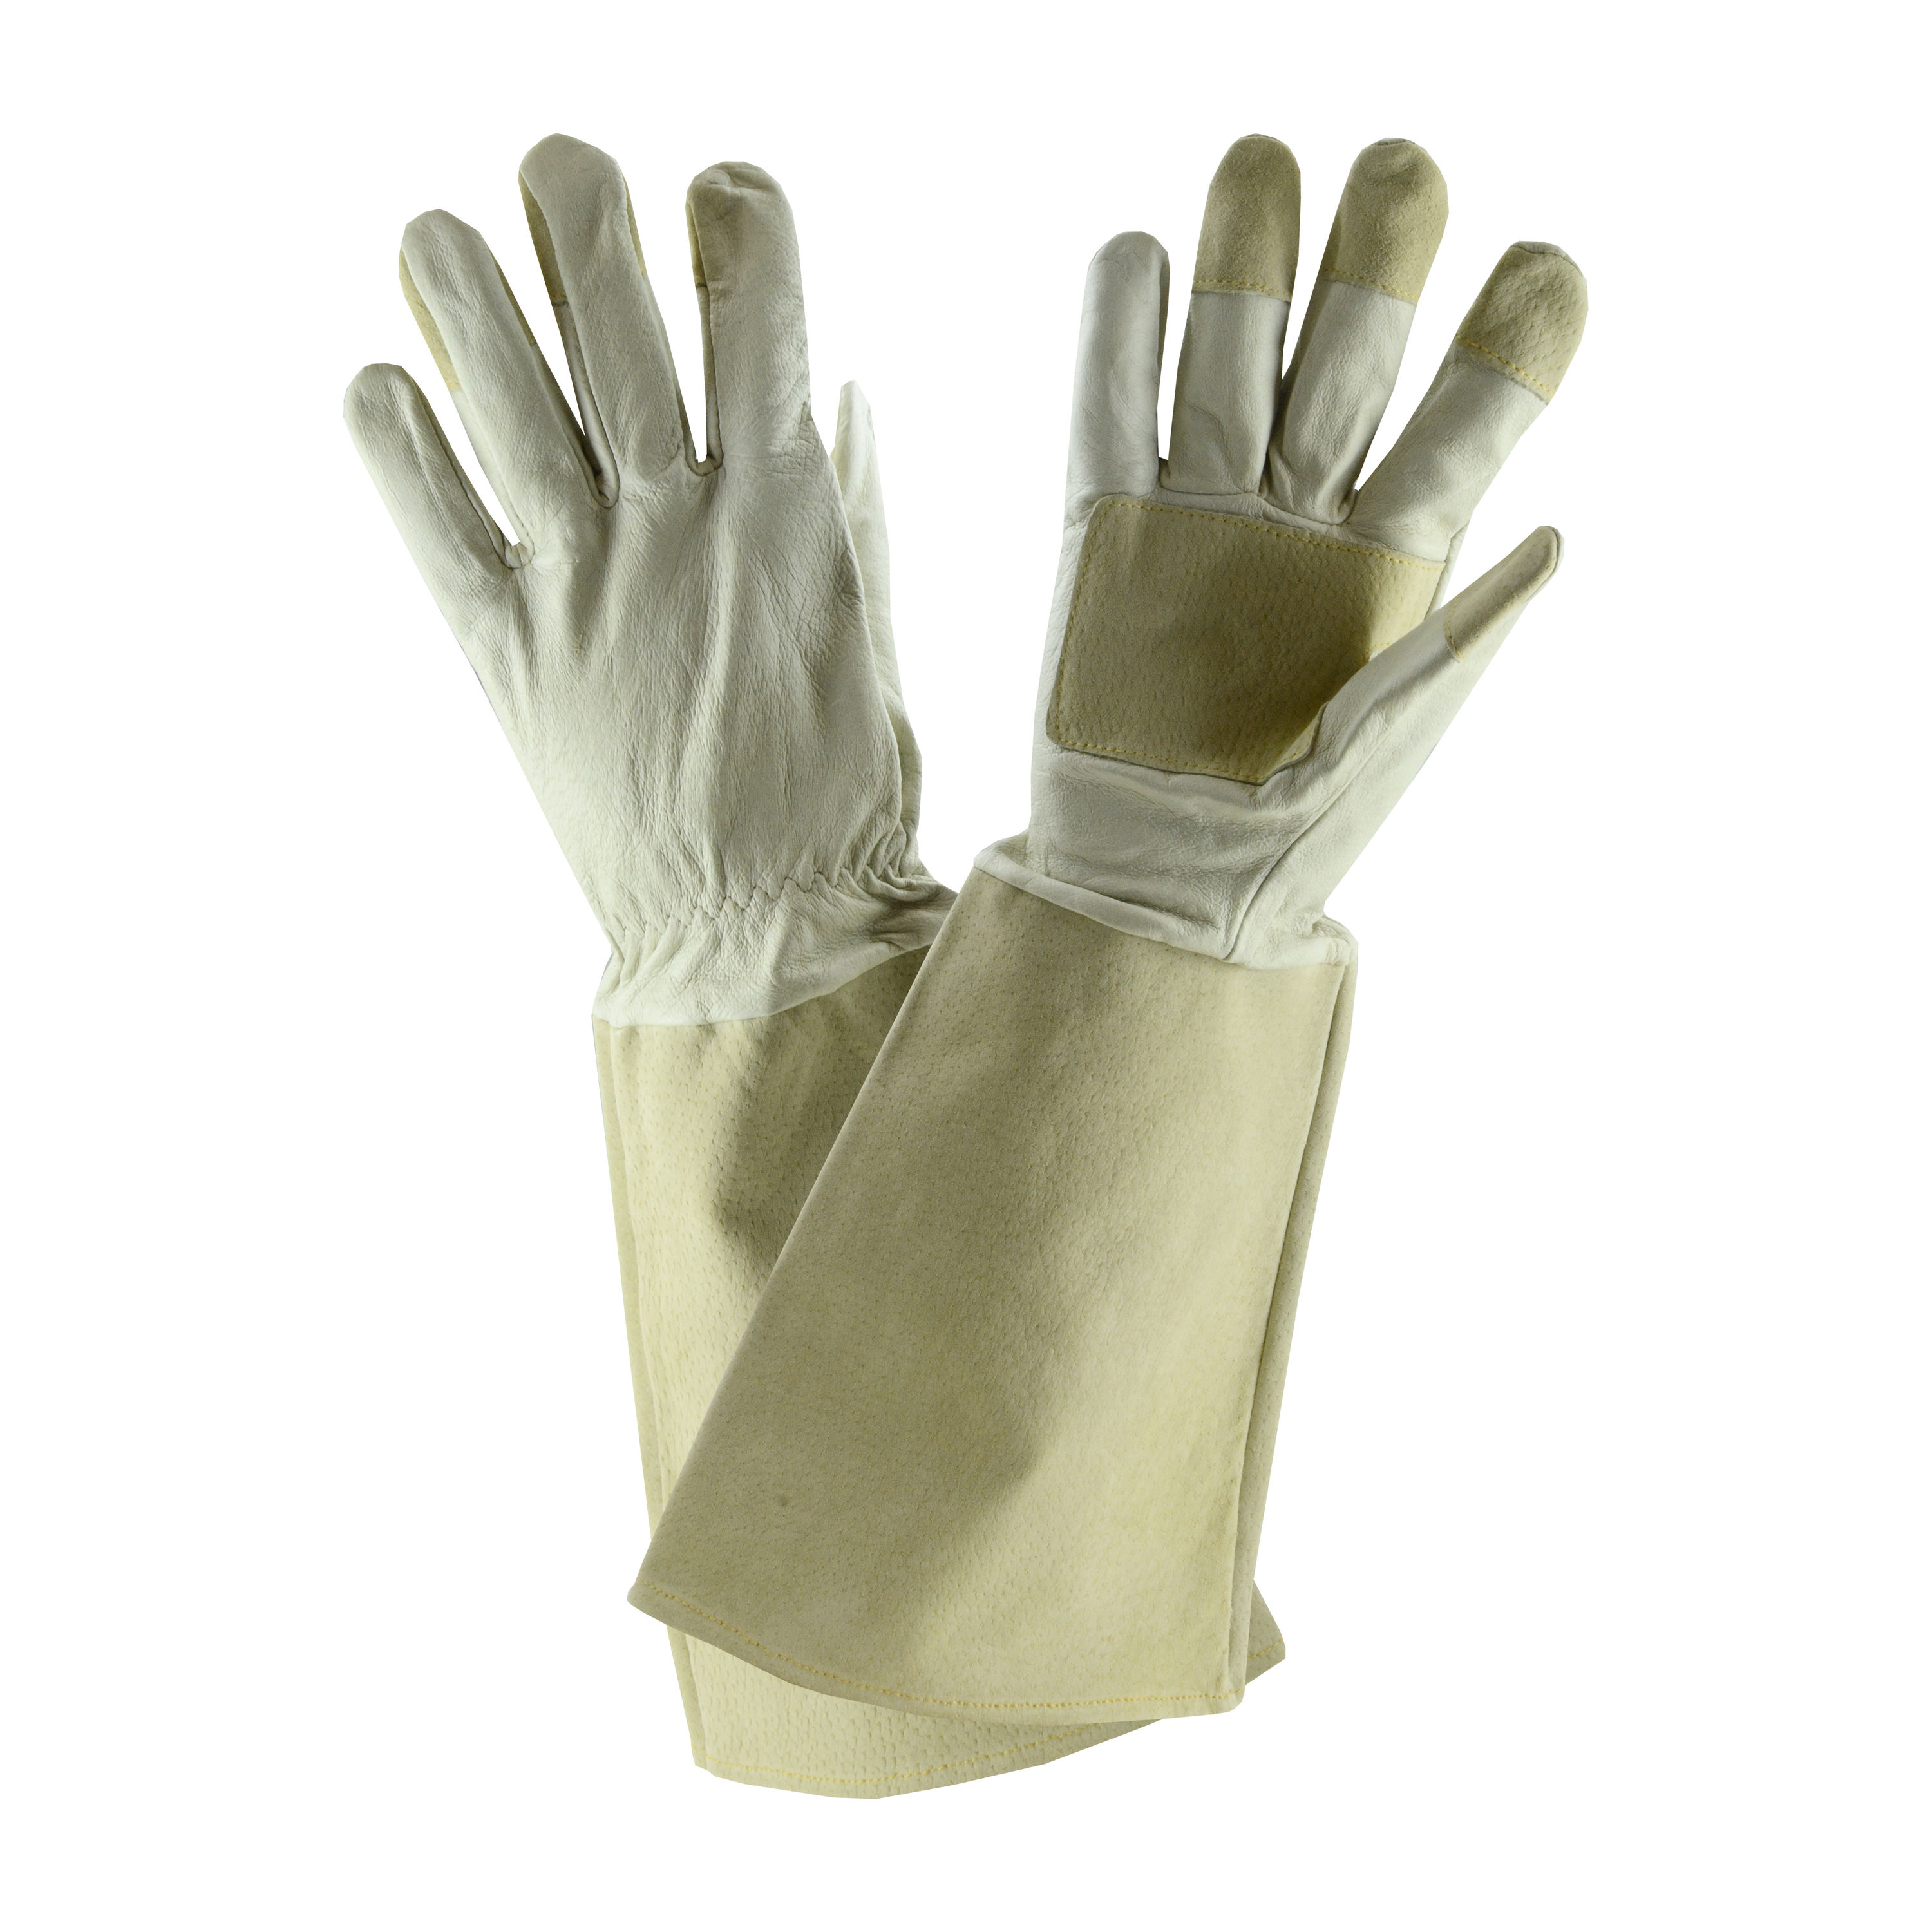 Style Selections Large Brown/Tan Leather Gardening Gloves, (1-Pair